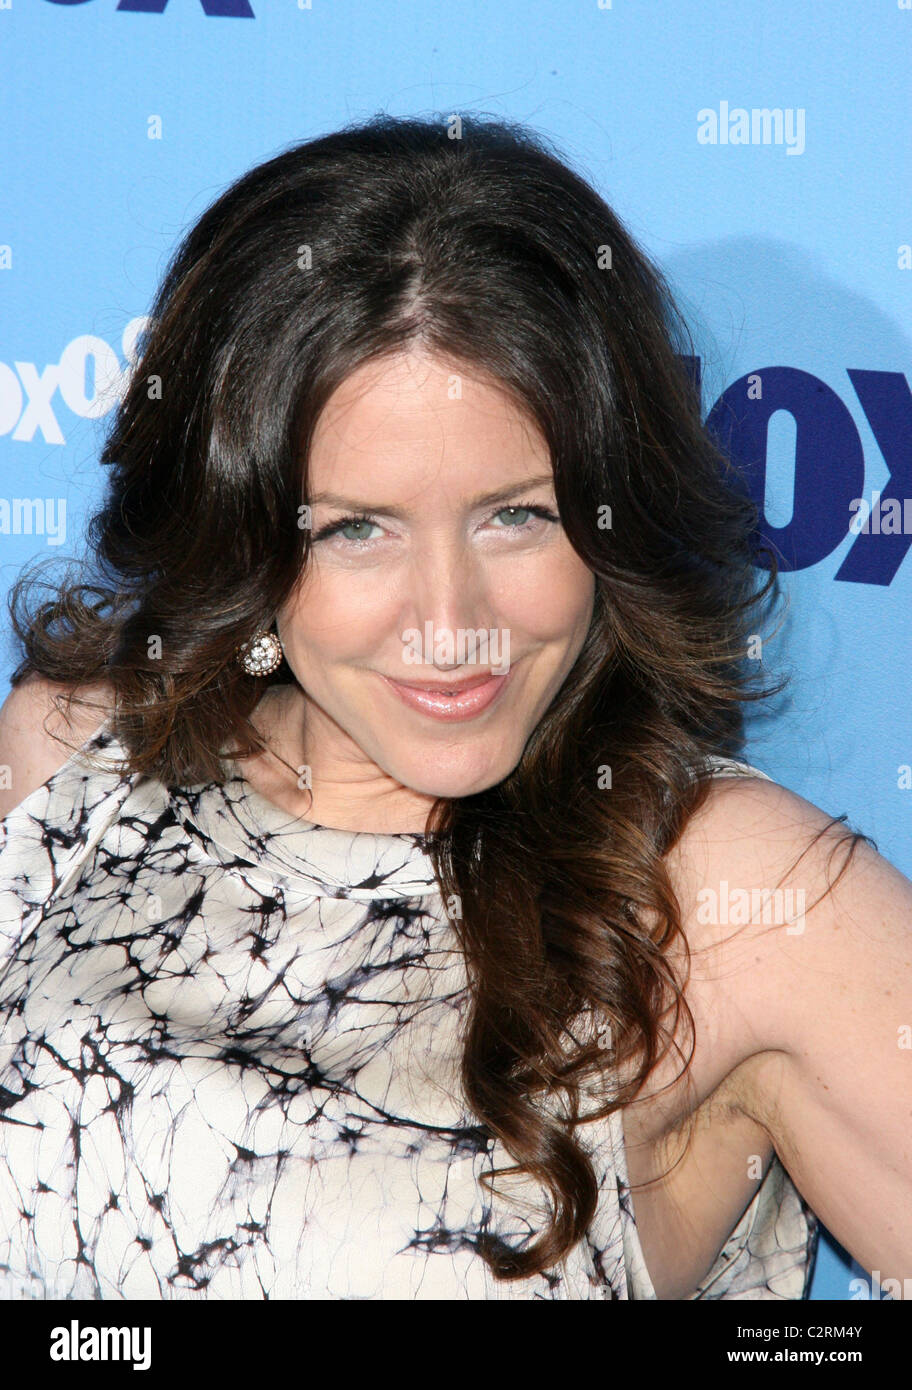 Joely Fisher 2008 FOX Upfront at Wollman Rink in Central Park - Arrivals New York City, USA - 15.05.08 PNP/ Stock Photo